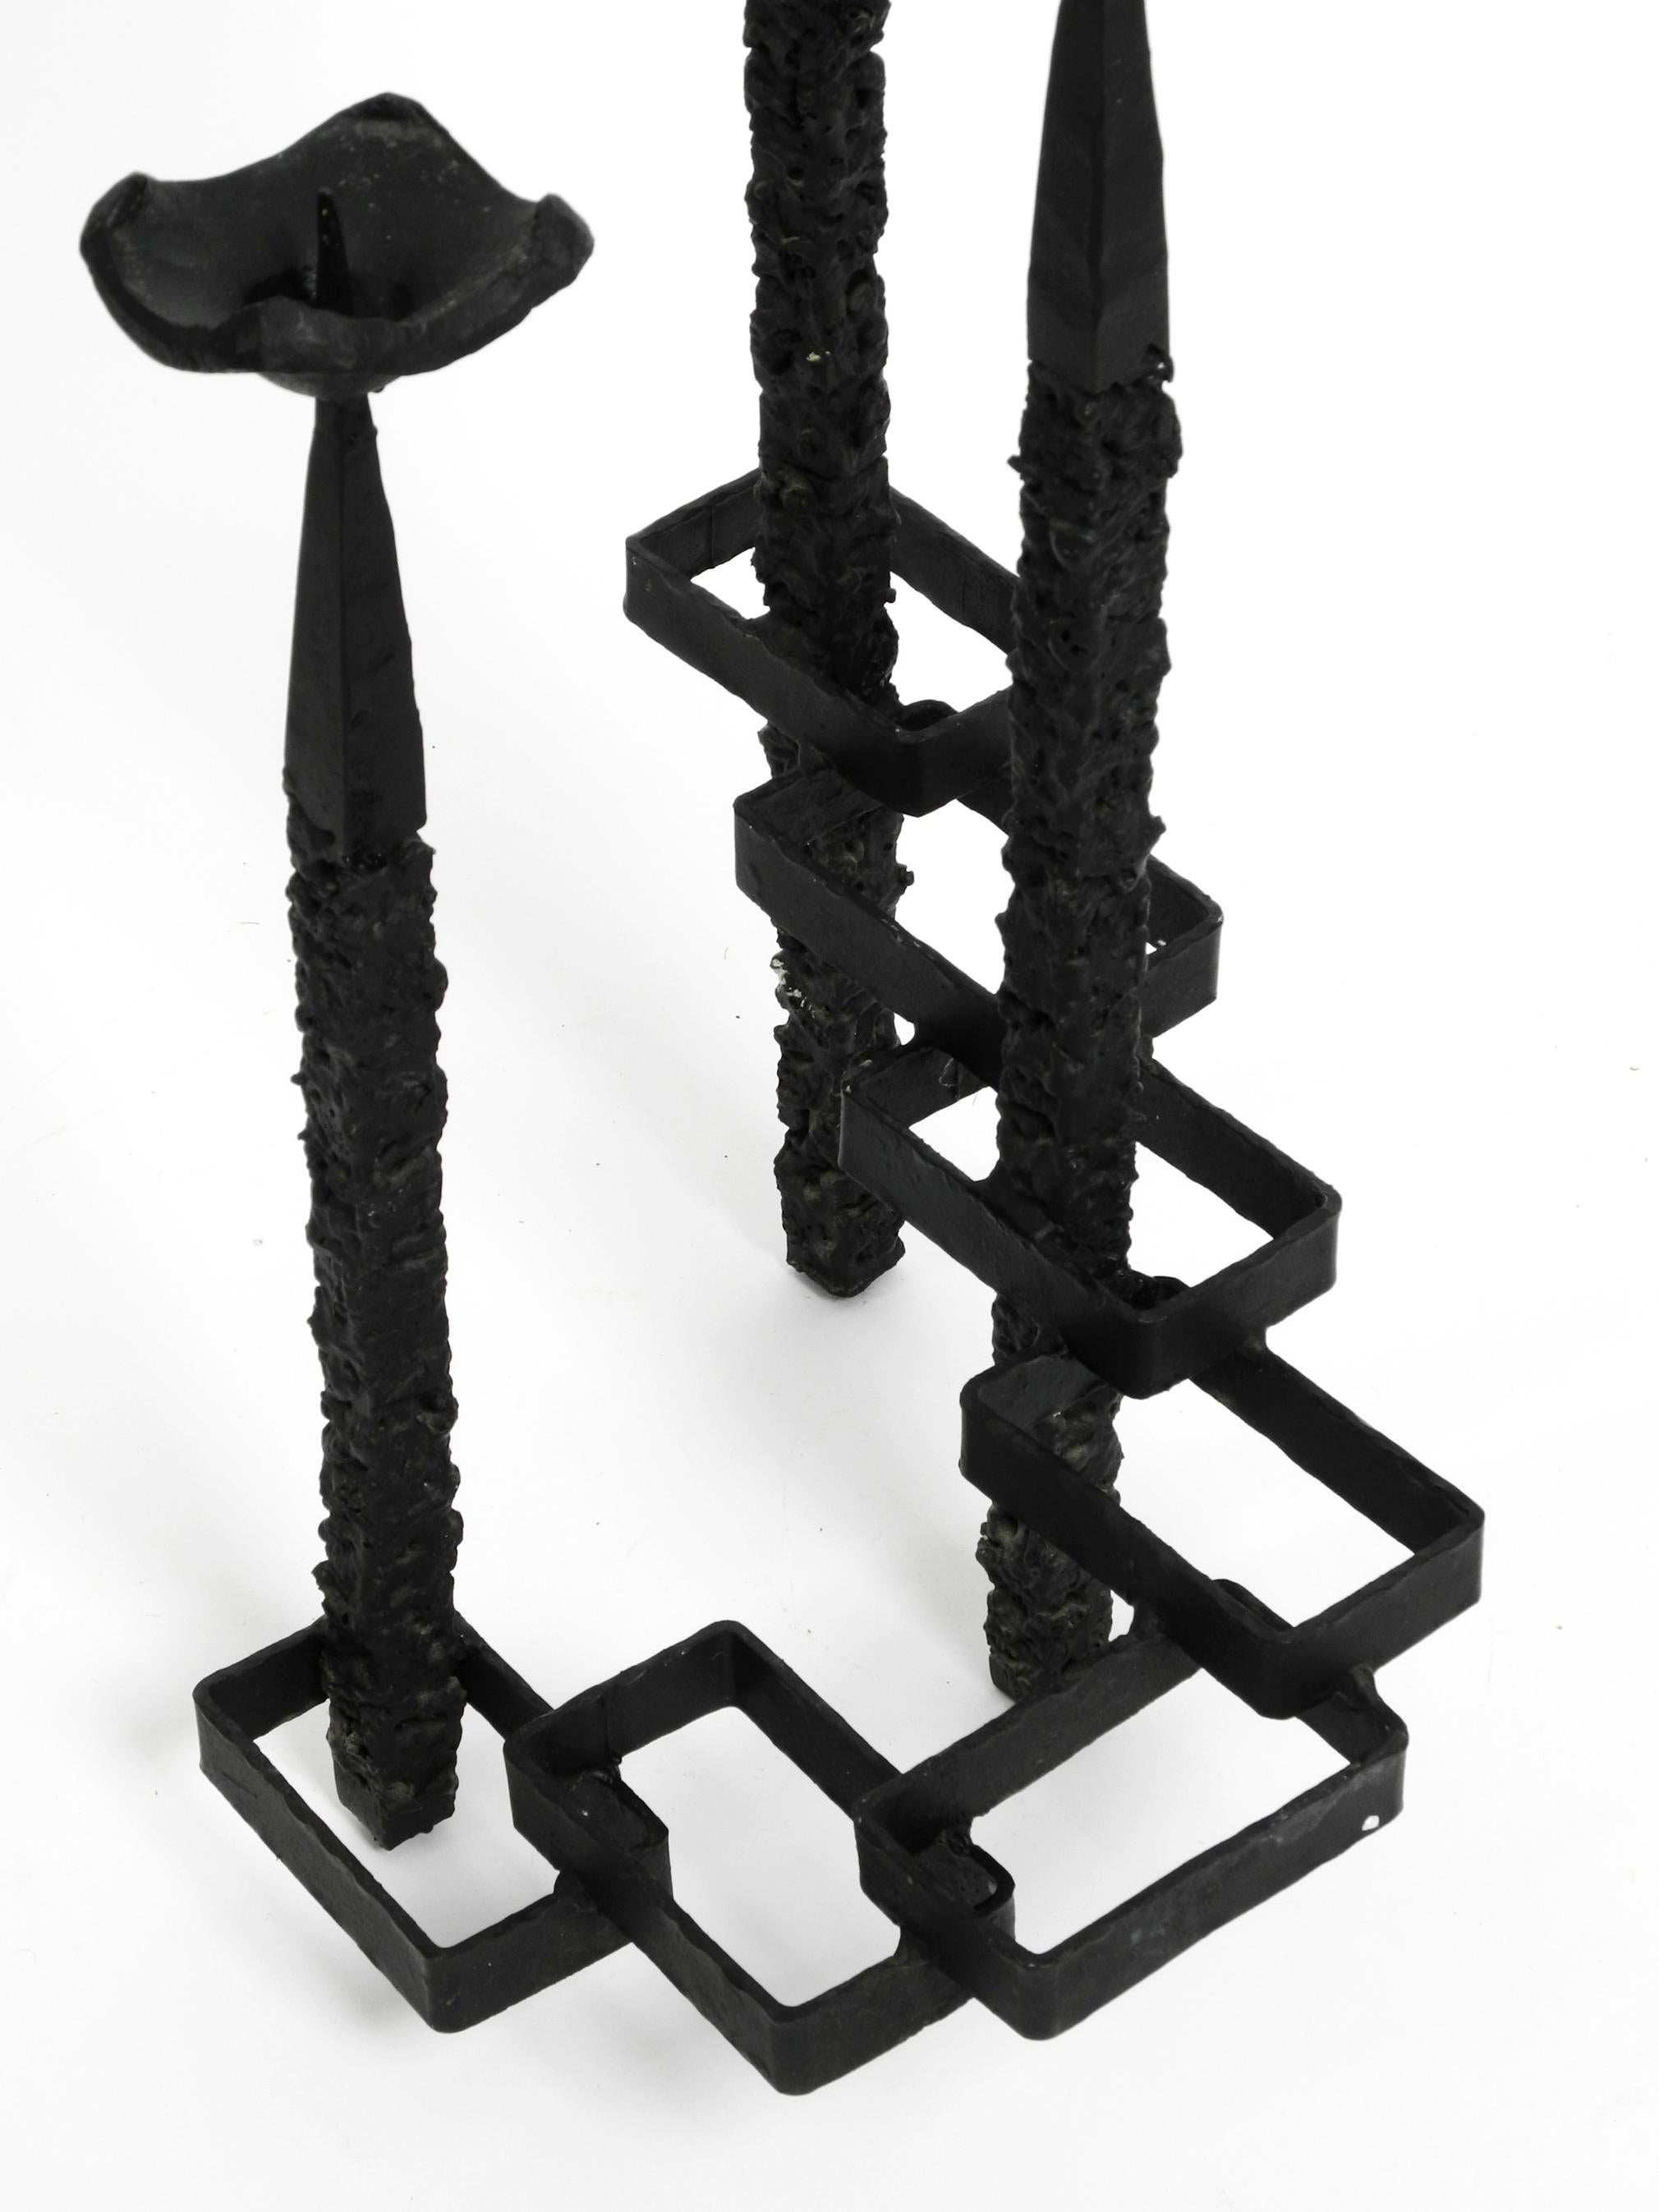 Mid-20th Century Large Floor or Table Candle Holder Made of Wrought Iron in Brutalist Design  For Sale